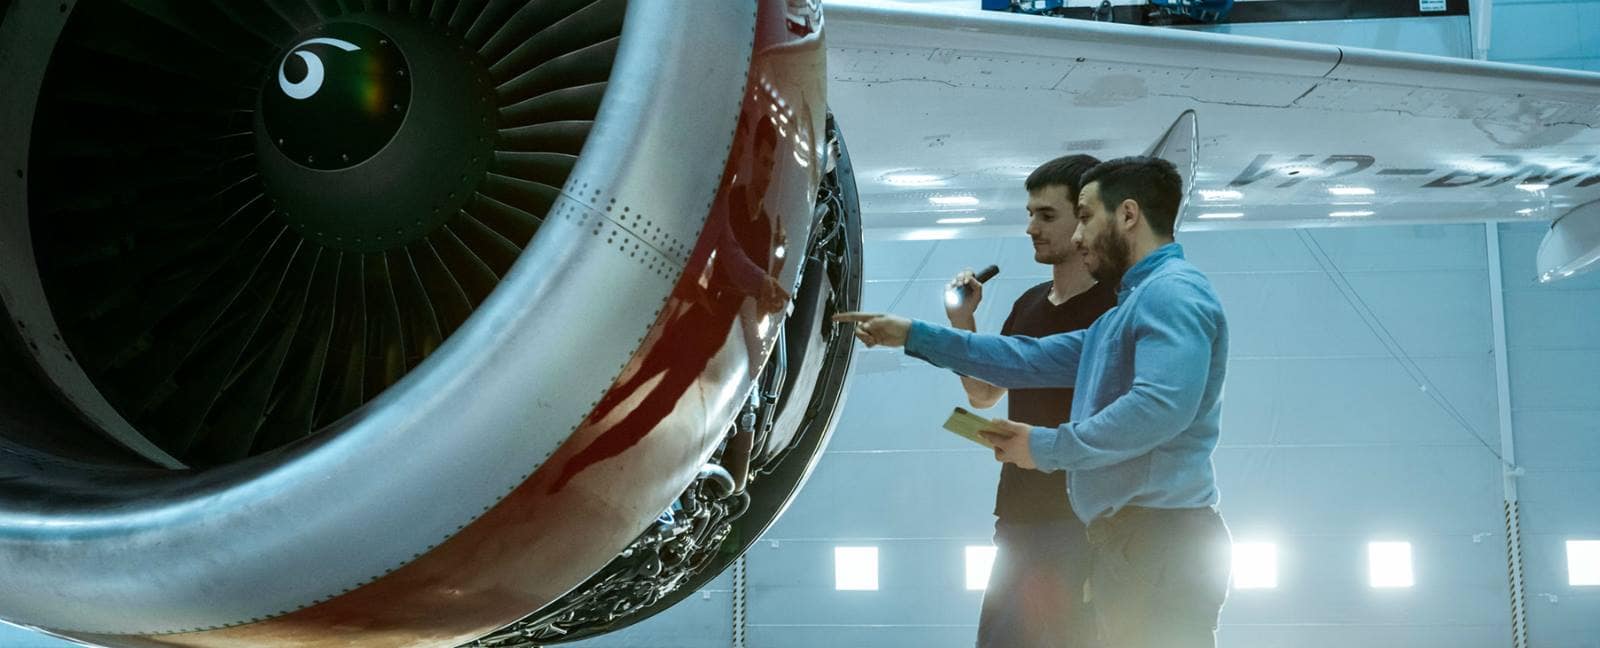 Two men look at a commercial airline engine